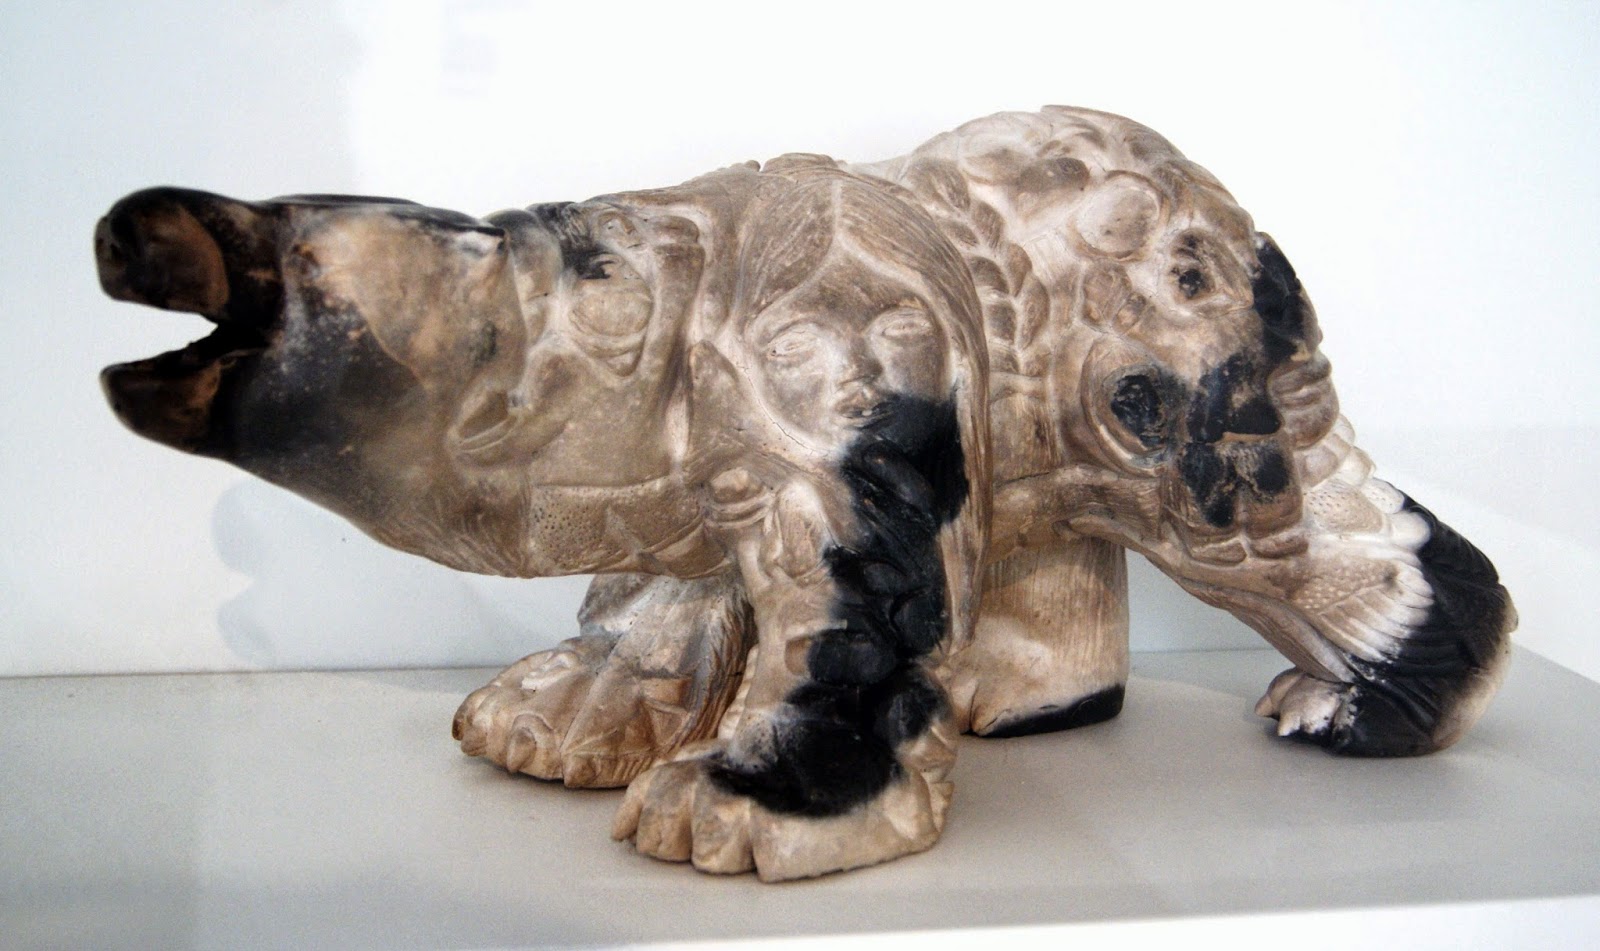 Museum of Inuit Art: Matchbox: A Retrospective Exhibit: Crouching Bear by Jack Nuyiyak and Leo Napayok, Culture, Arctic, Native, Toronto, Quuens Quay Terminal, Sculptures, MIA, Ceramic, Canada, Canadian Artist, Gallery, The Purple Scarf, Melanie.Ps